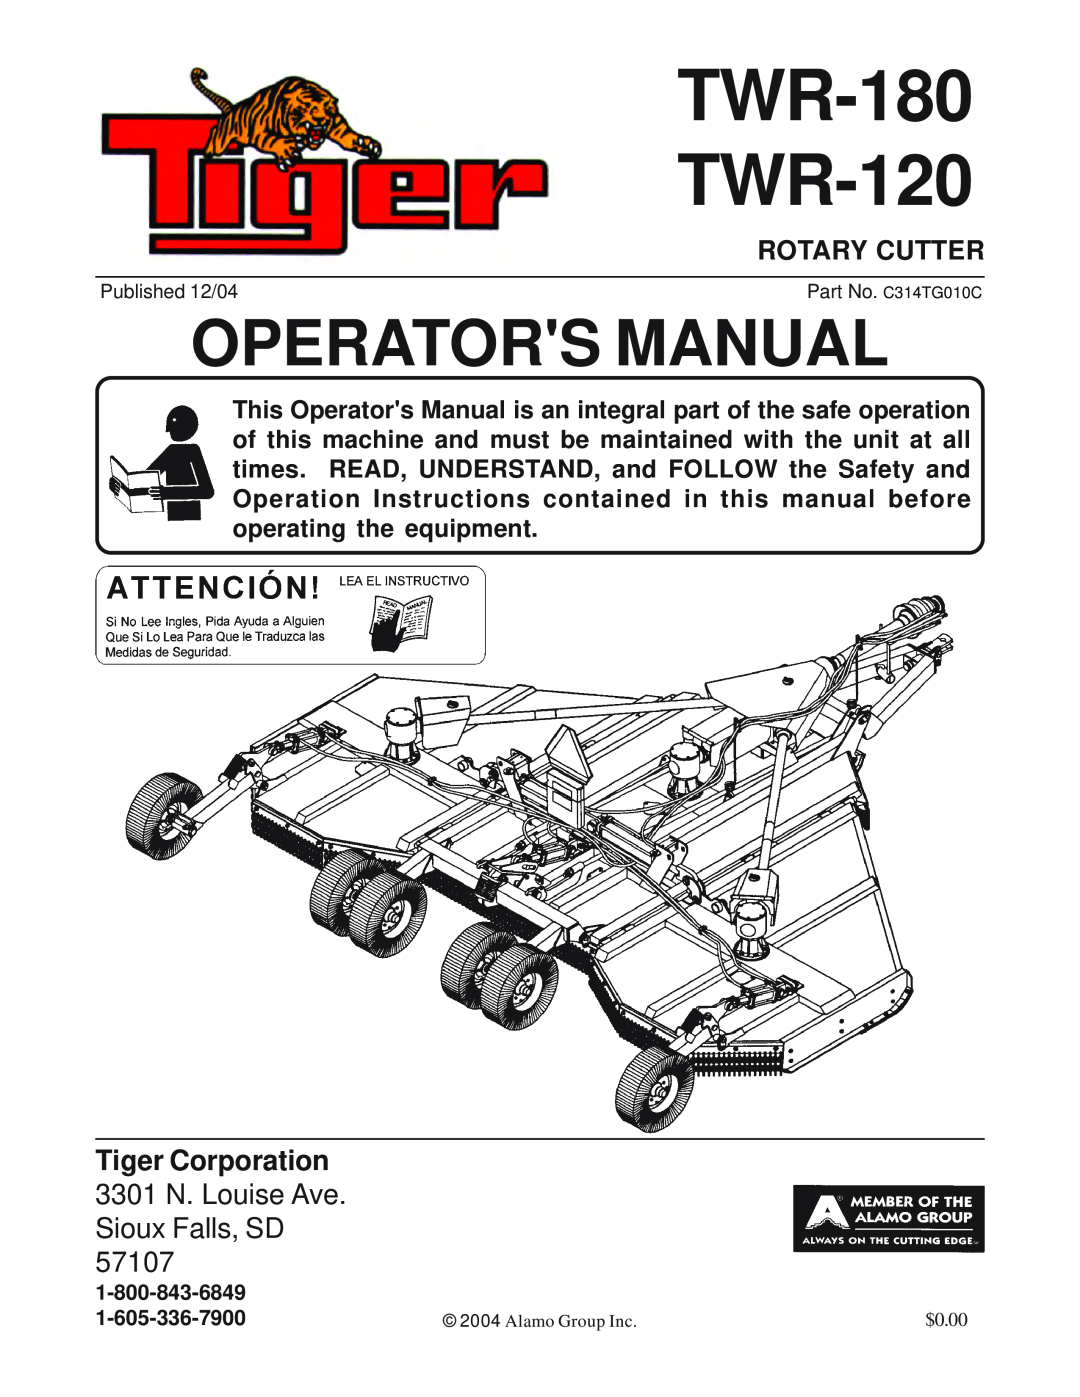 Tiger Products Co., Ltd manual Tiger Corporation 3301 N. Louise Ave. Sioux Falls, SD, TWR-180 TWR-120, Operators Manual 